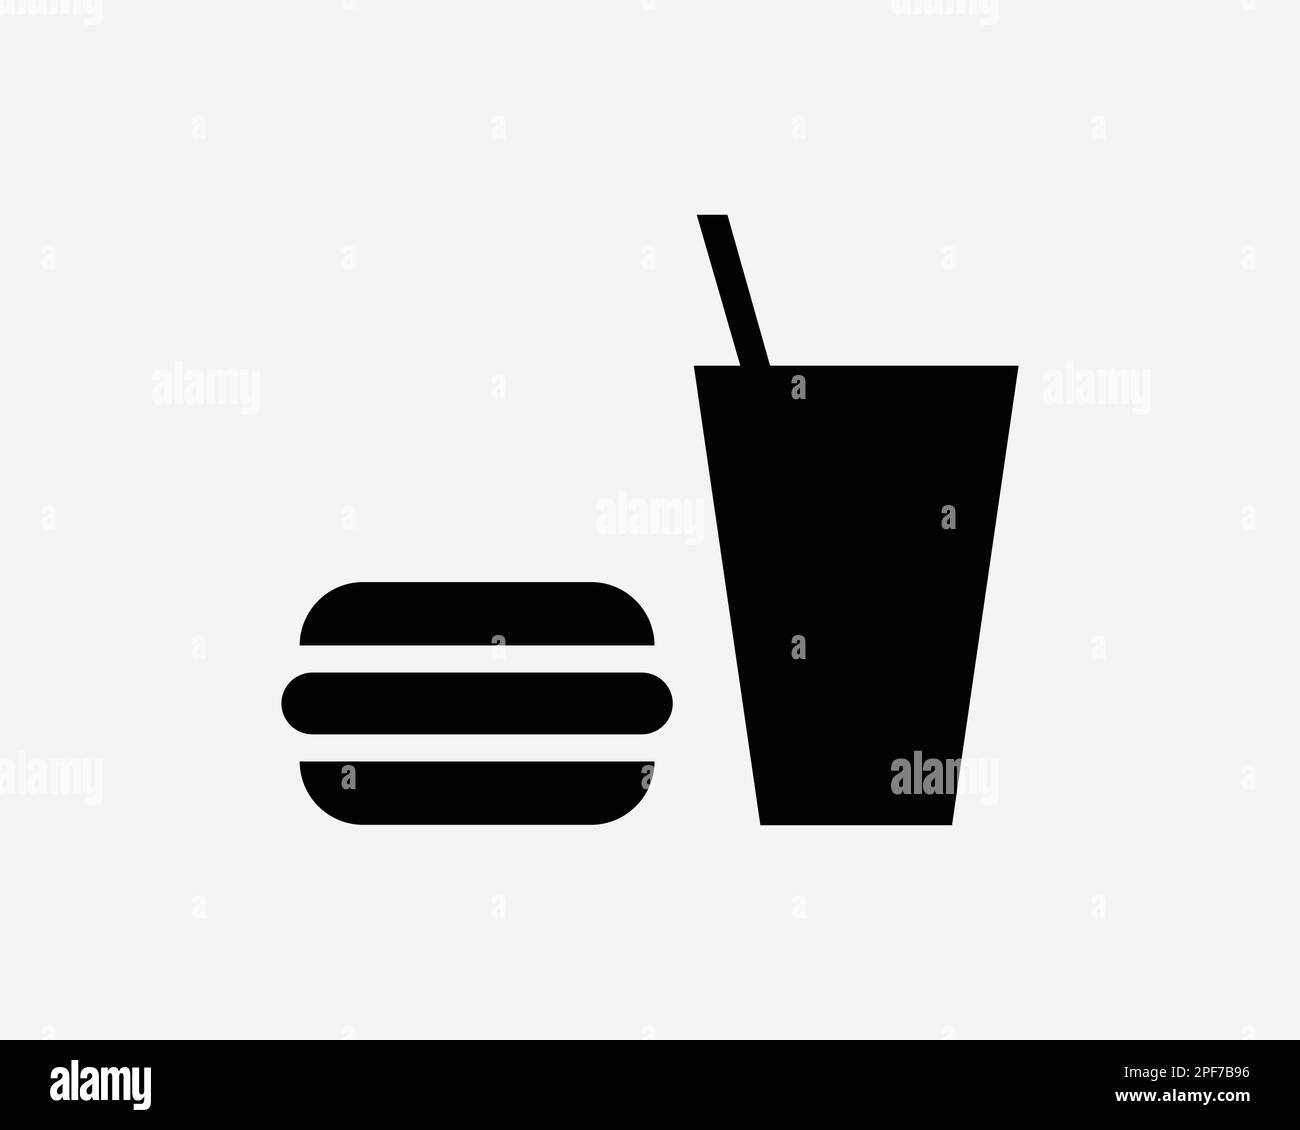 Food and Drink Icon Burger Soda Cup Soft Drinks Pop Hamburger Black White Silhouette Symbol Sign Graphic Clipart Artwork Illustration Pictogram Vector Stock Vector